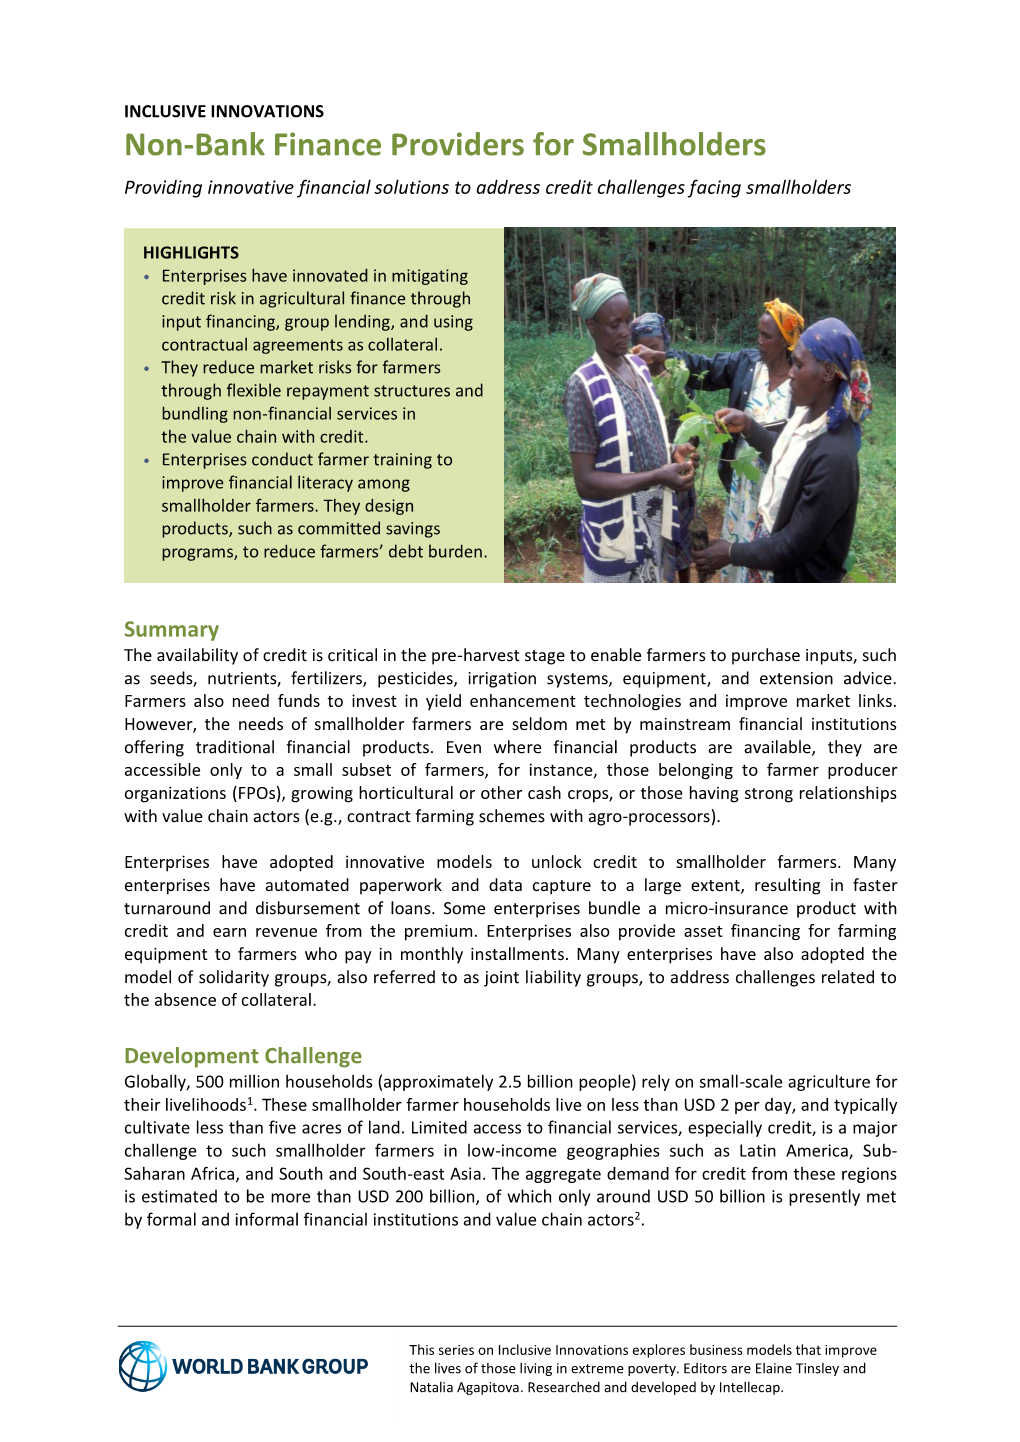 Non-Bank Finance Providers for Smallholders Providing Innovative Financial Solutions to Address Credit Challenges Facing Smallholders